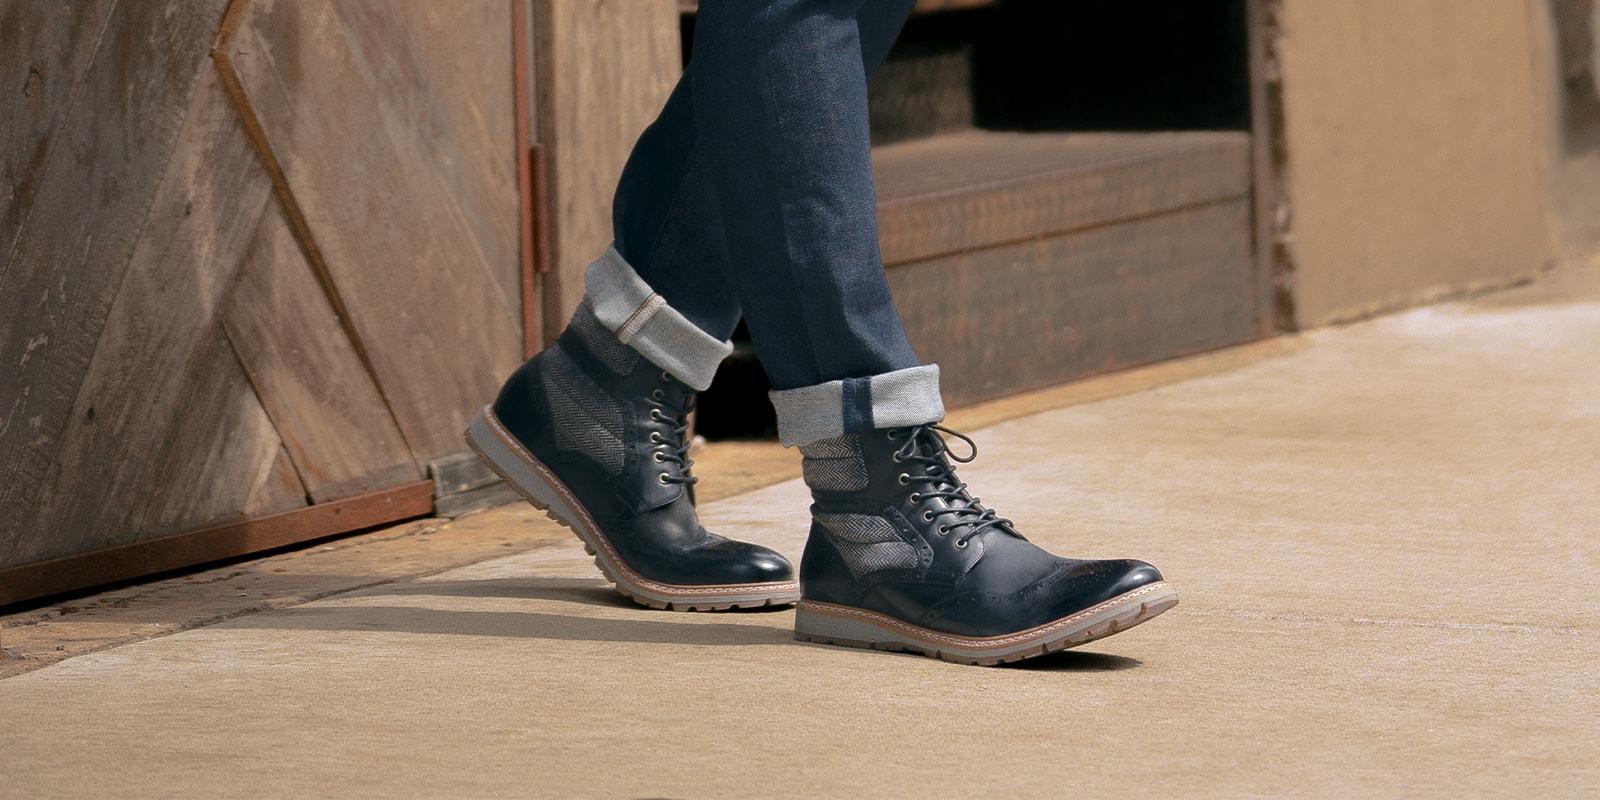 The featured product is the Granger Wingtip Lace Boot in Black.